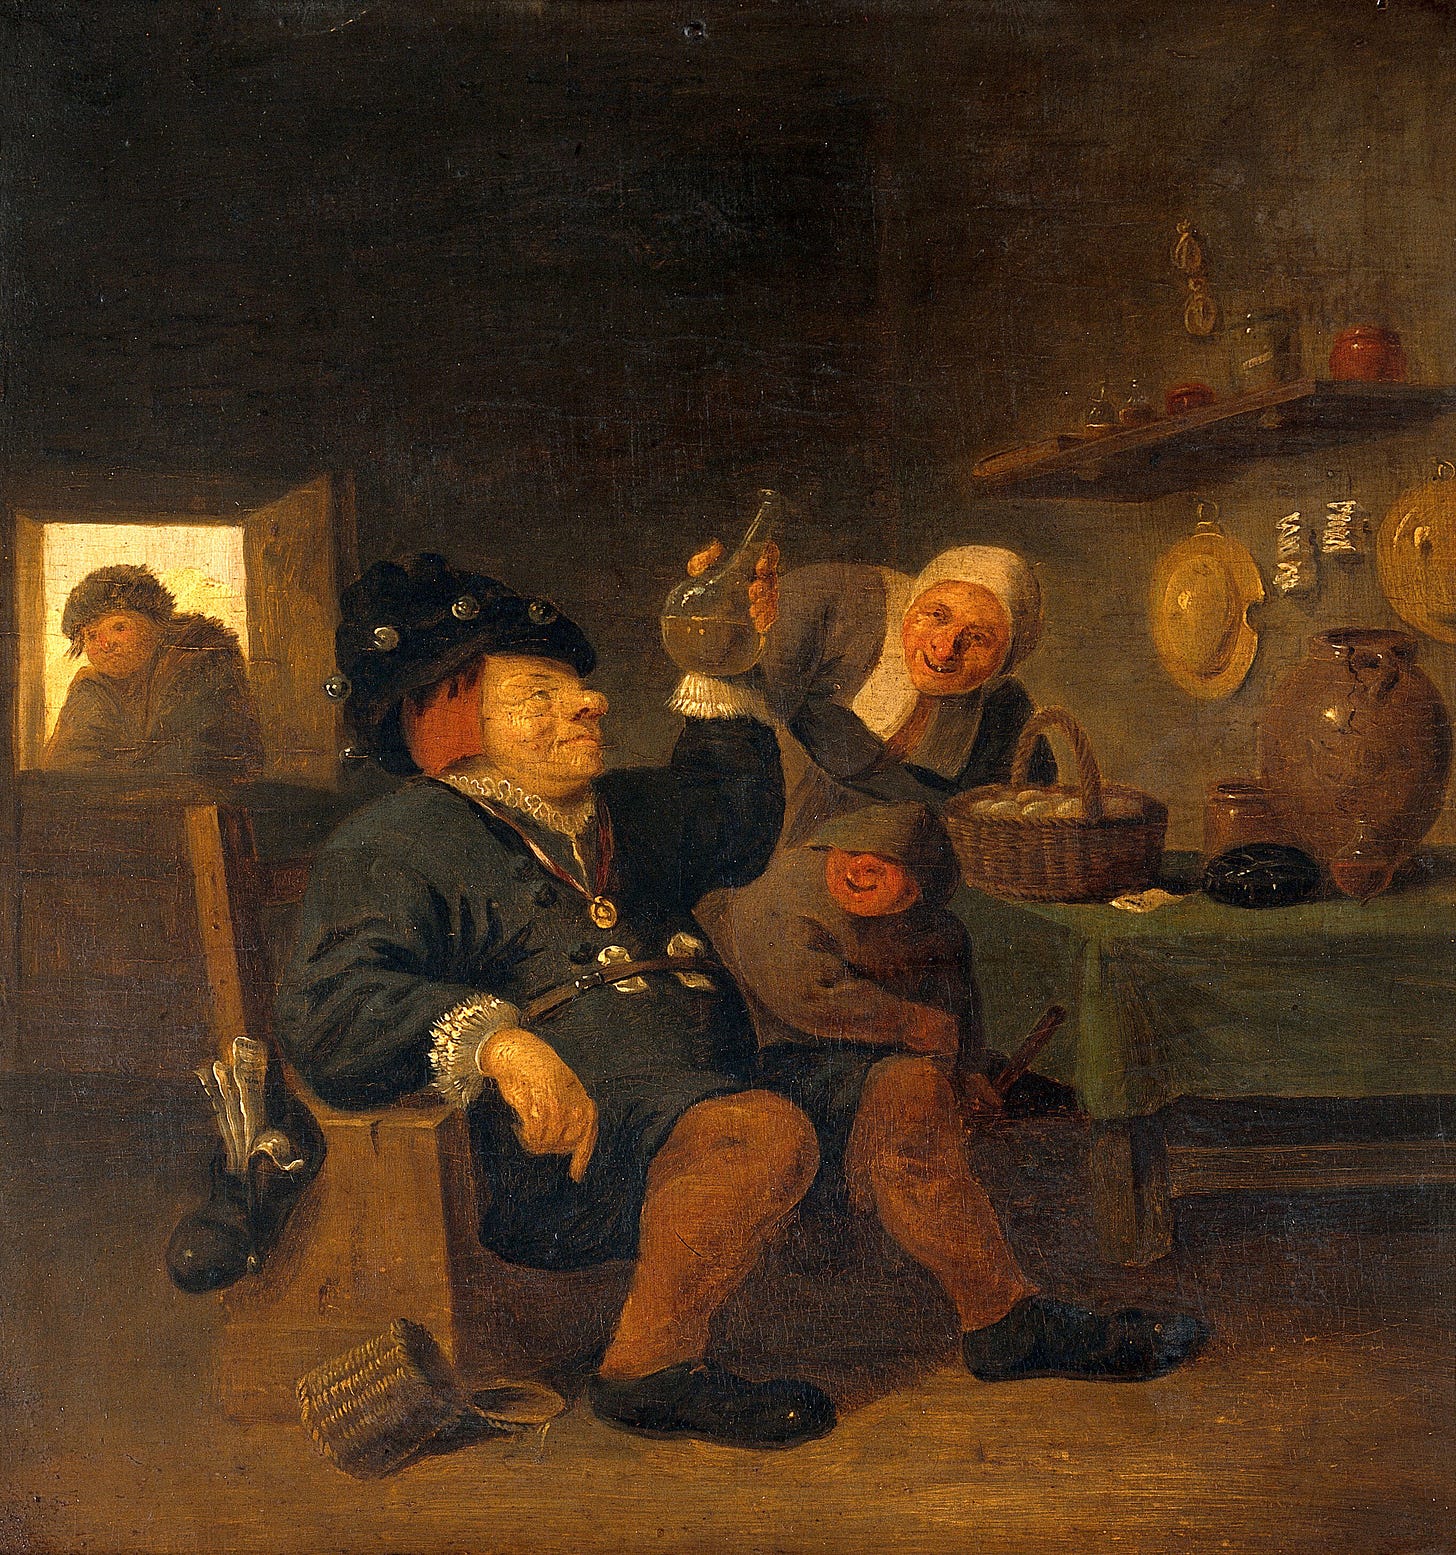  This oil painting shows a dark interior where a rotund doctor in 17th-century attire sits in a chair. He is holding up a bottle of urine and looking at it carefully. Next to his chair, a smiling woman and boy peer at the bottle expectantly. In the background is a window where a man looks in, apparently less impressed than the others.